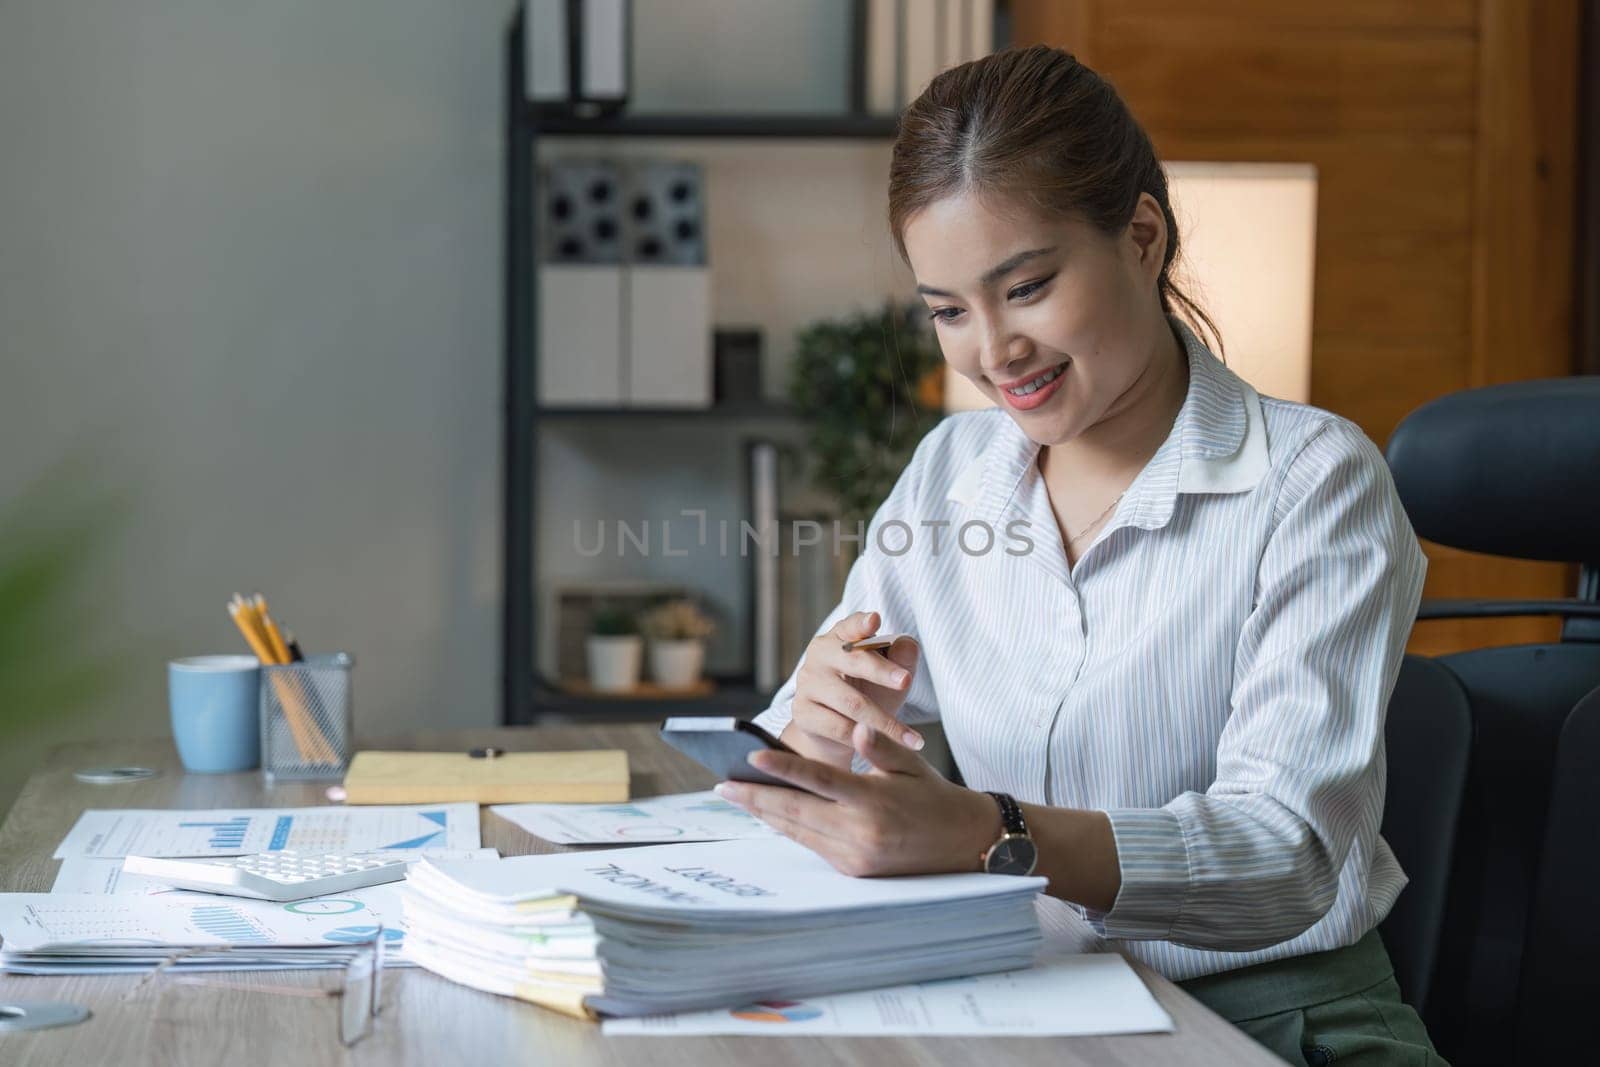 Smiling young business woman, happy beautiful professional lady worker holding smartphone using cellphone mobile working at office checking cell phone at workplace.